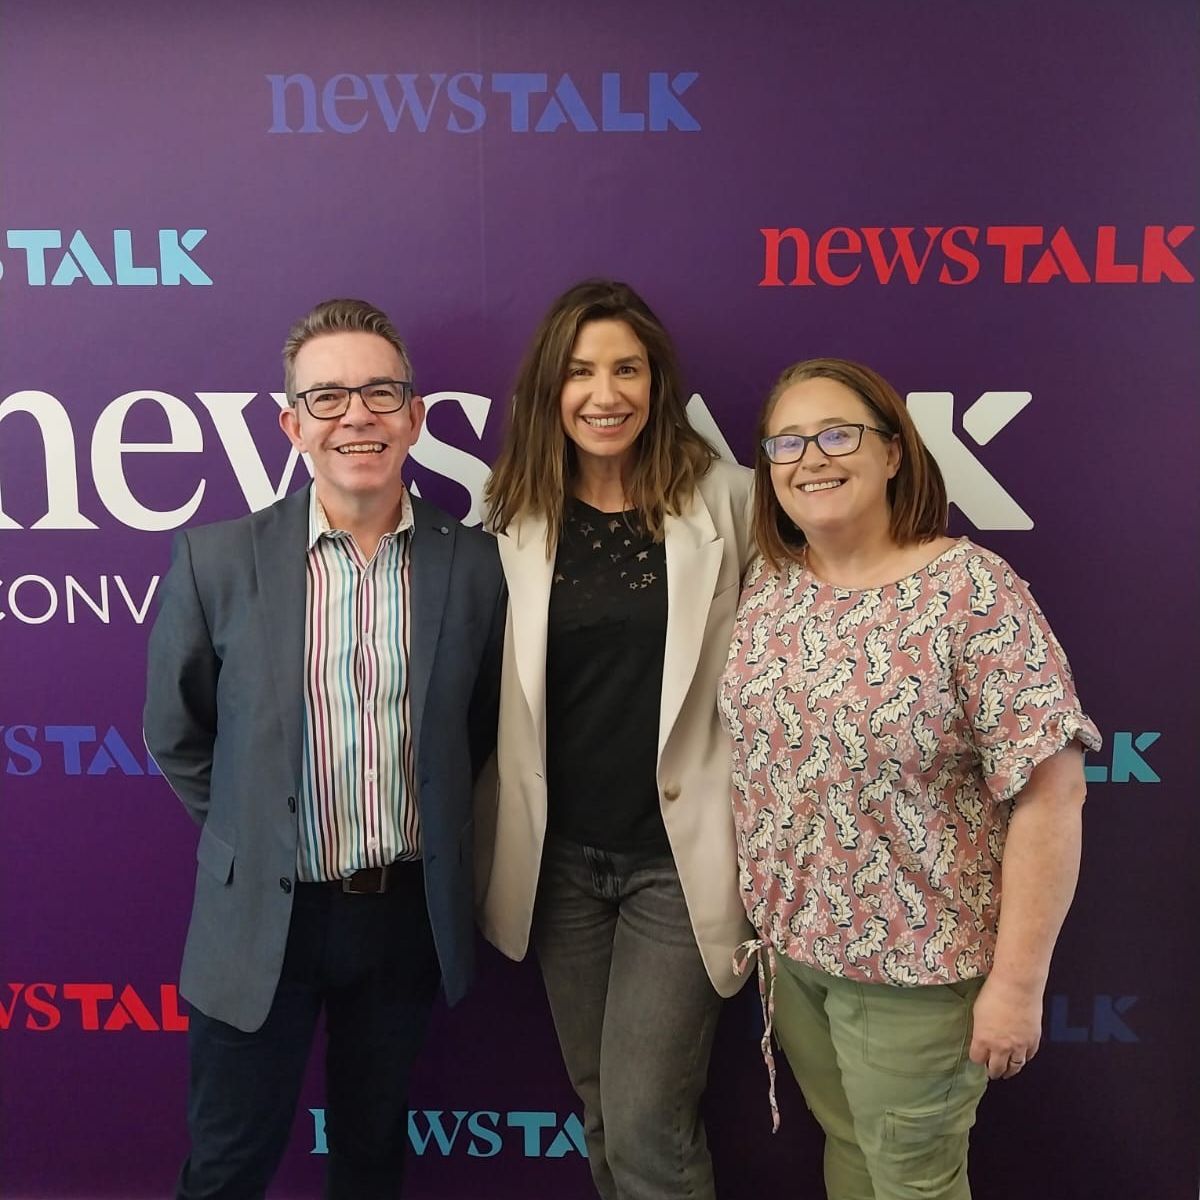 #NoRegrets Bowel Cancer ambassadors - patient ambassador @BrendanDonlon and GP Dr Fiona Macken @fitfall pictured with @NewstalkFM @cmckpresents. Interview will be broadcast on Newstalk's Alive and Kicking Show Sunday, May 19th BTW 8am and 9am. #BowelCancer #ColorectalCancer